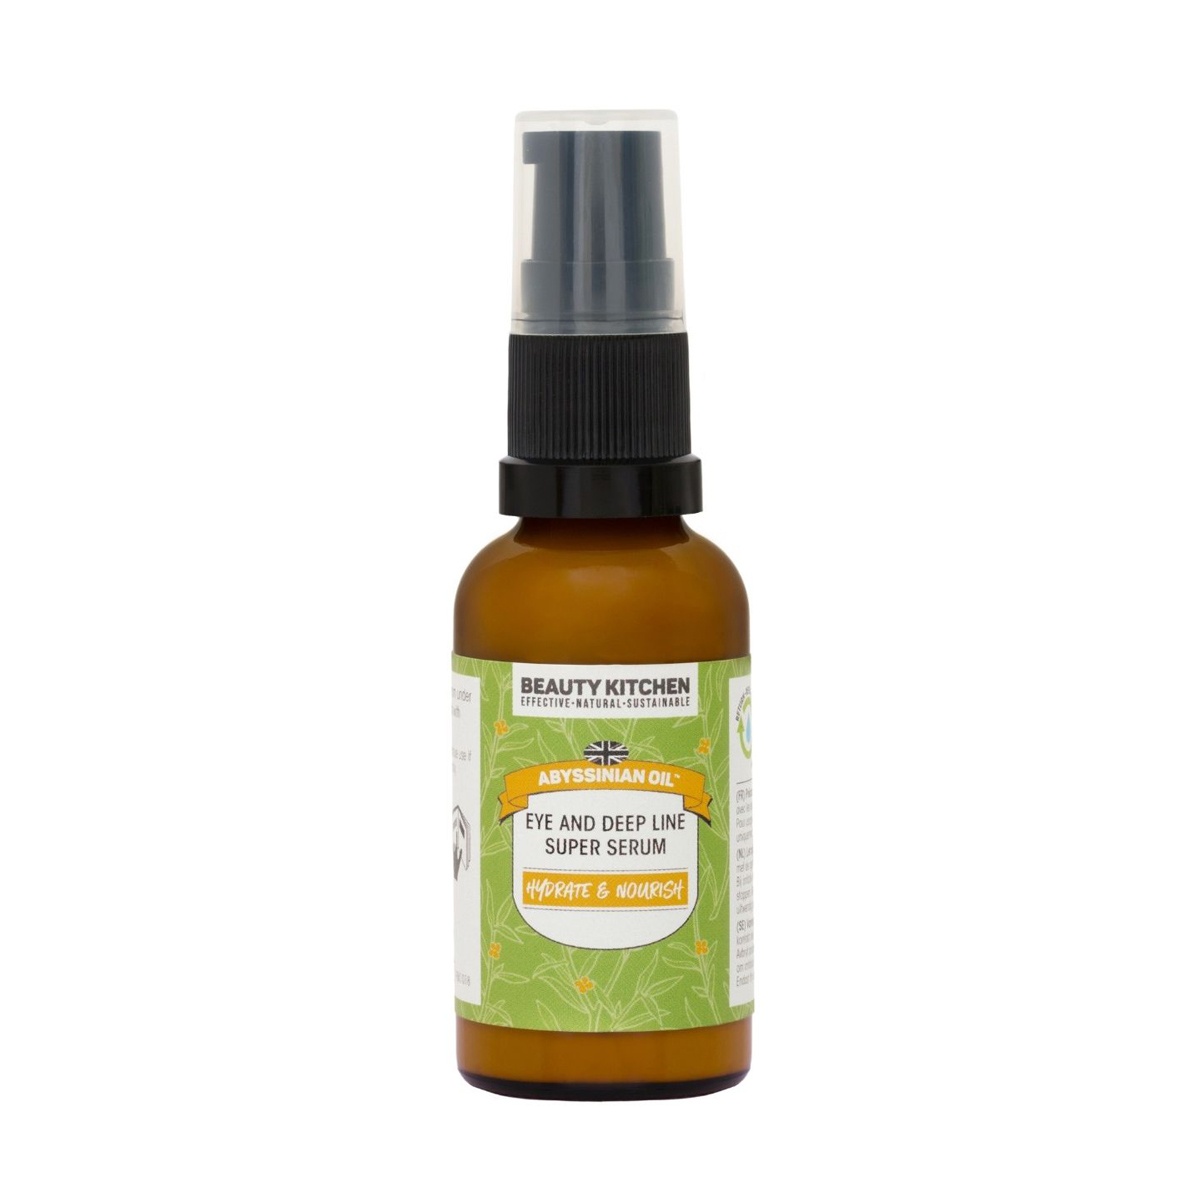 BEAI UTY KITCHEN EFFECTIVE-NATURAL-SUSTAIRABLE S e PRSP EYE AND DEEP LINE SUPER SERUM 